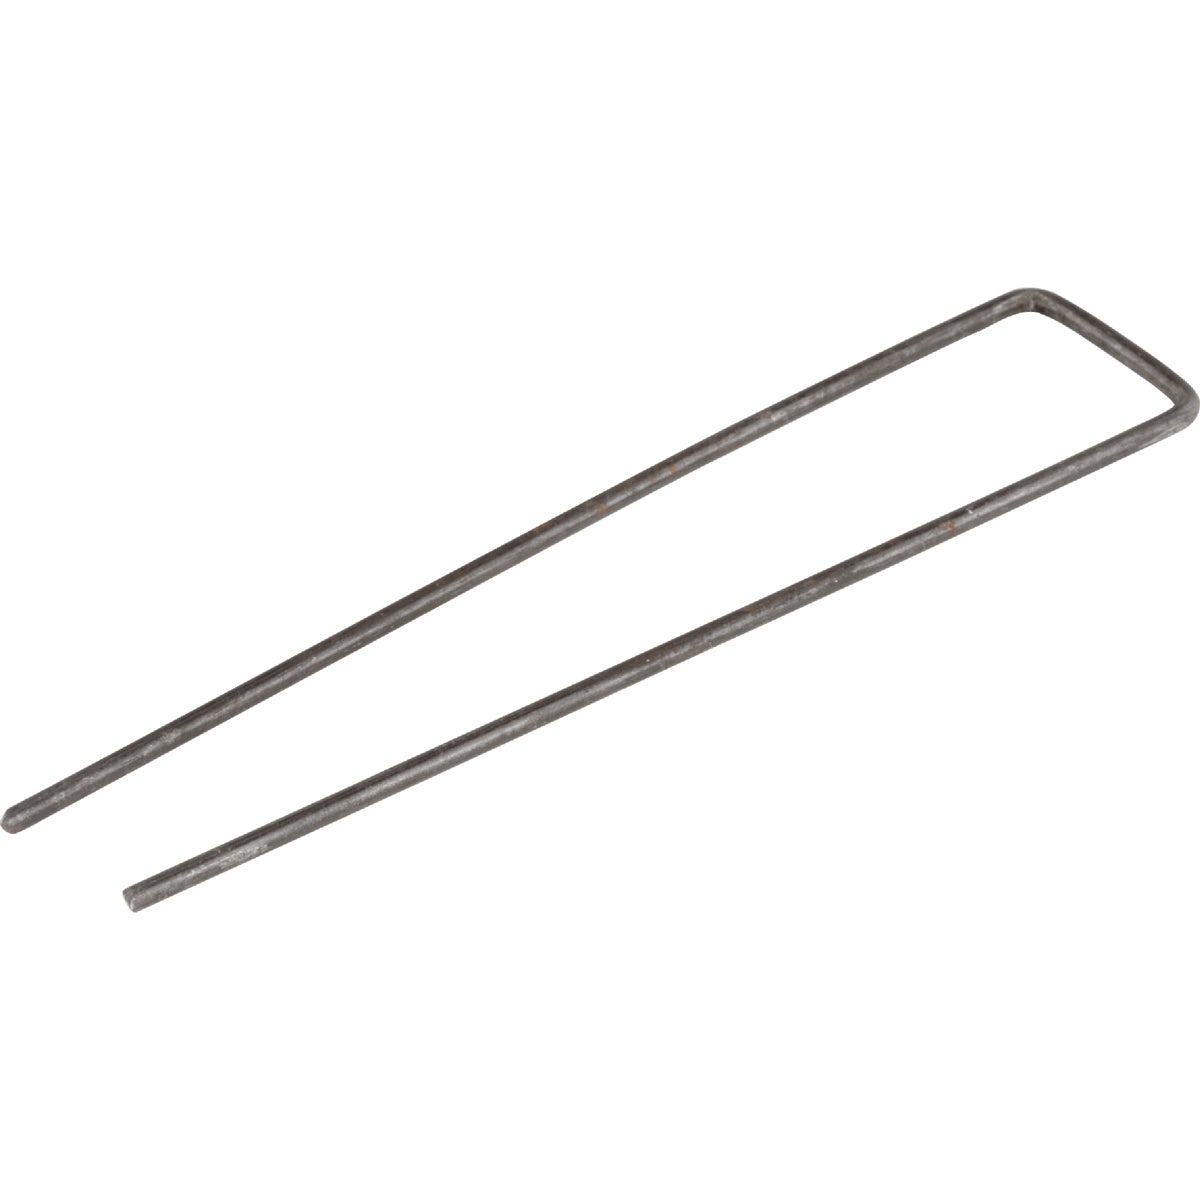 Item 704806, Sod staples, or landscape fabric pins secure landscape fabric and sod to 